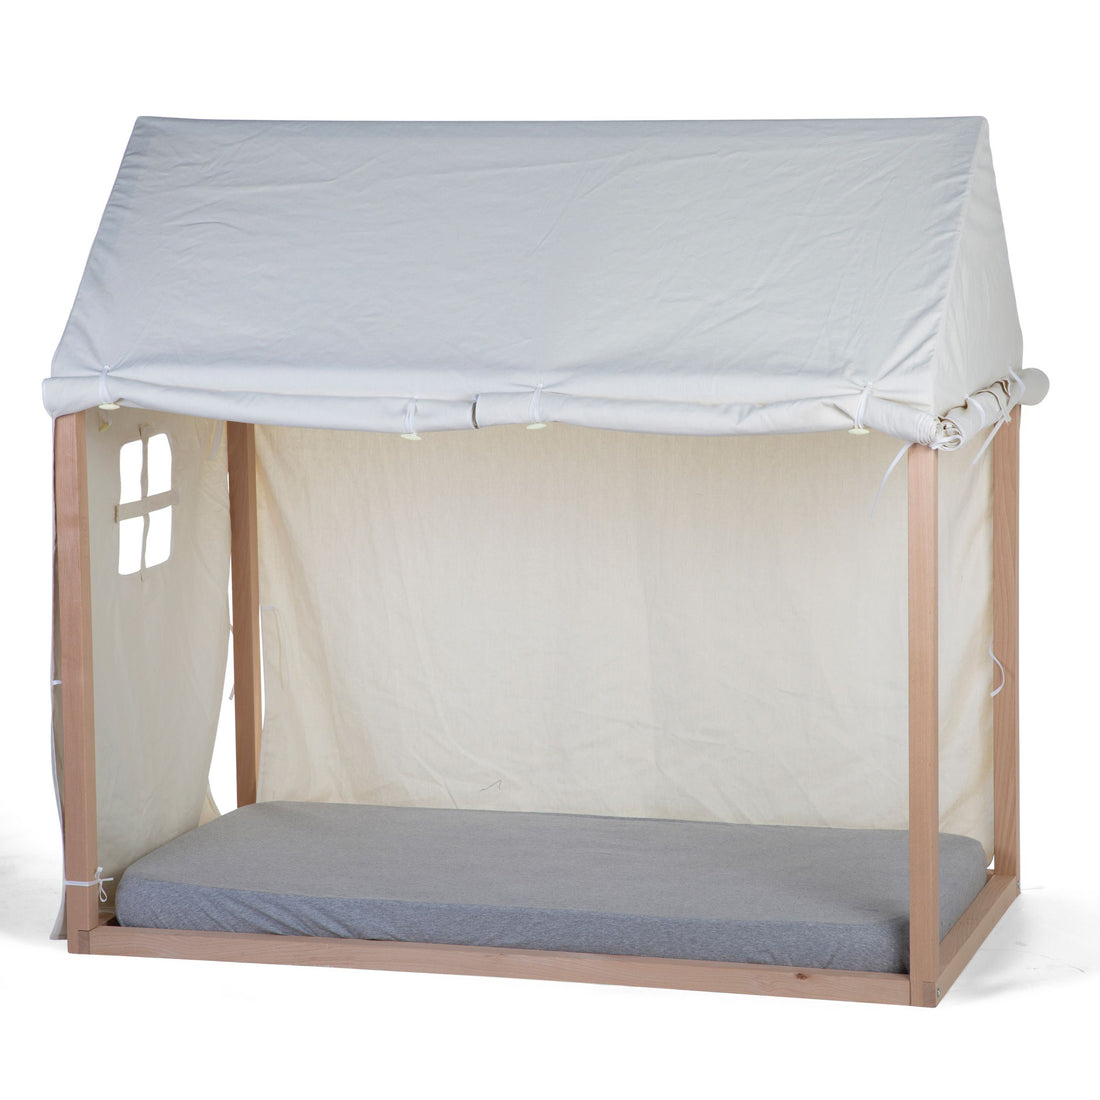 childhome-bedframe-house-cover-white- (2)